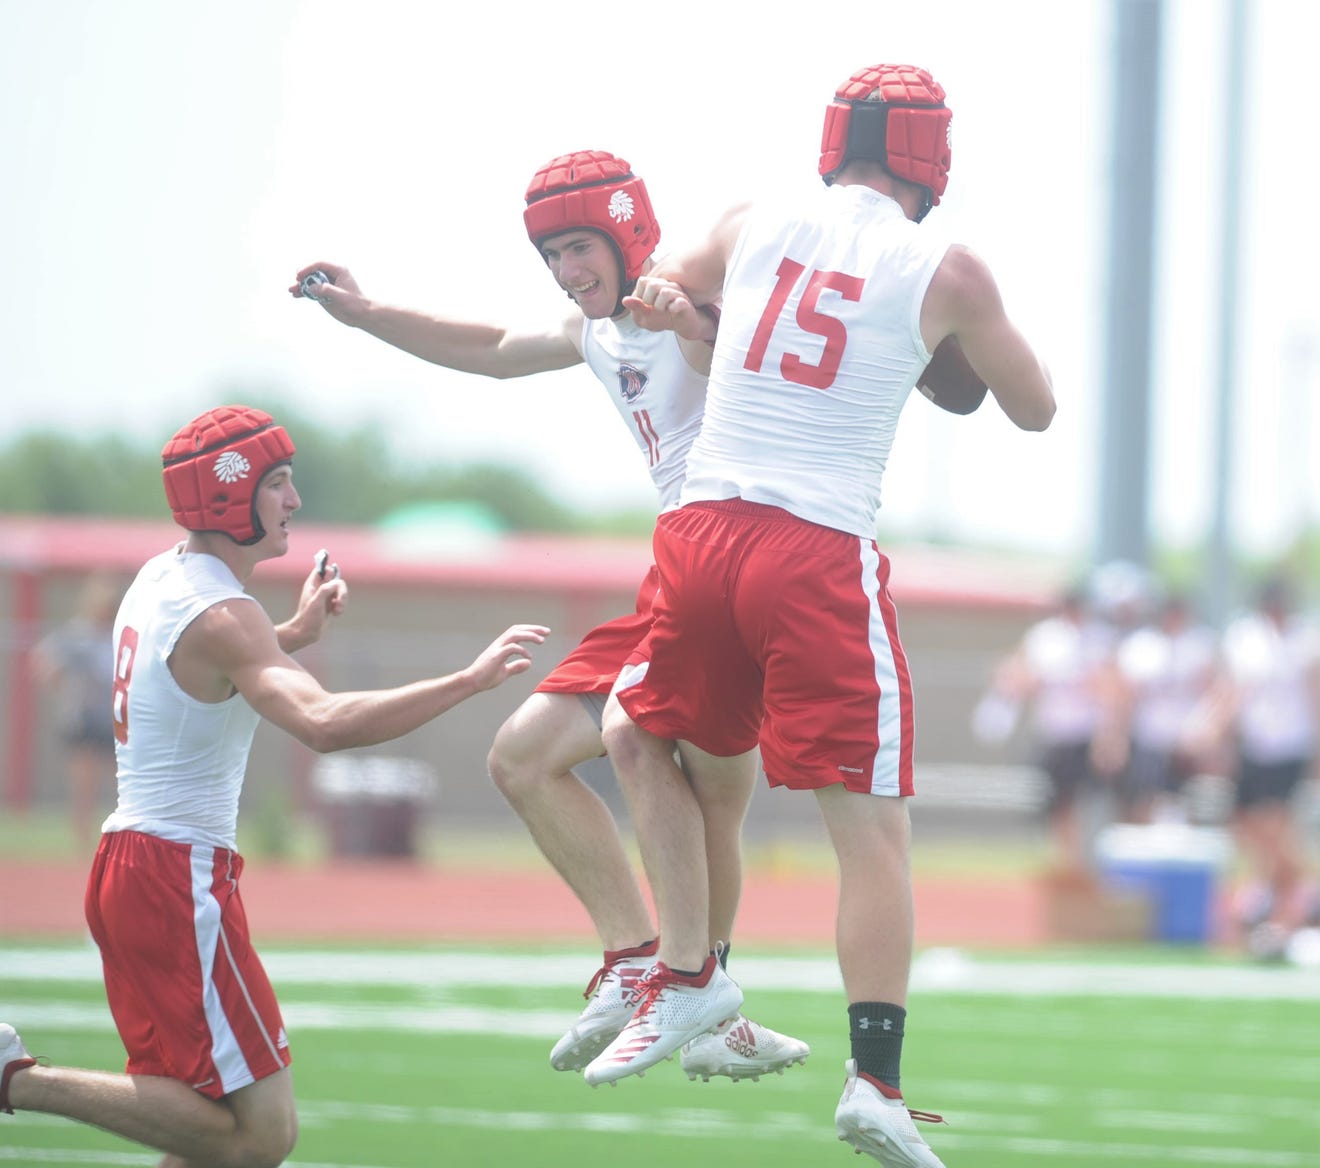 Jim Ned qualifies for secondstraight 7on7 state tournament